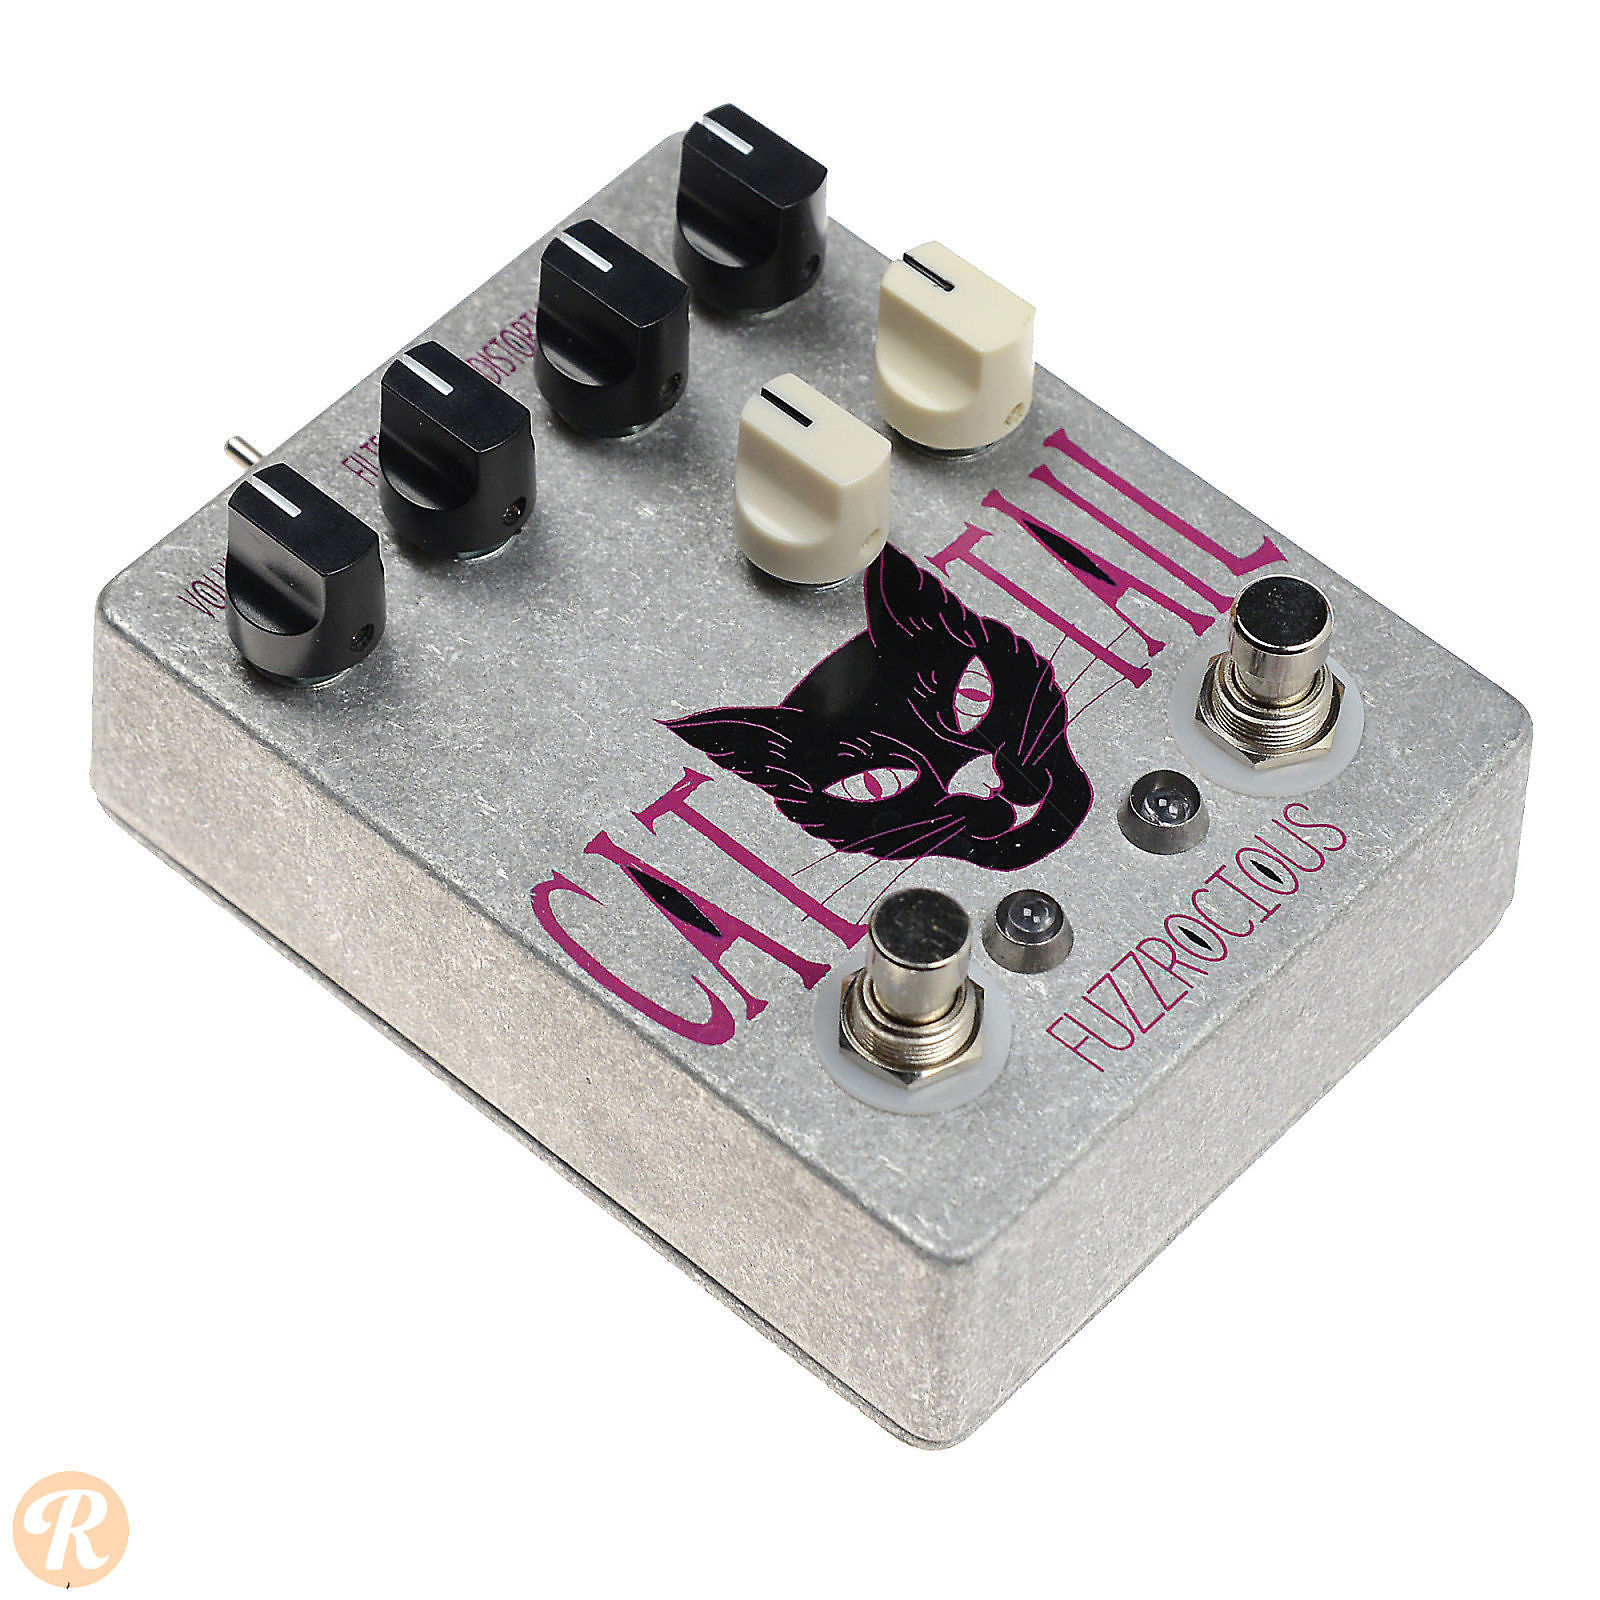 Fuzzrocious Cat Tail Distortion | Reverb